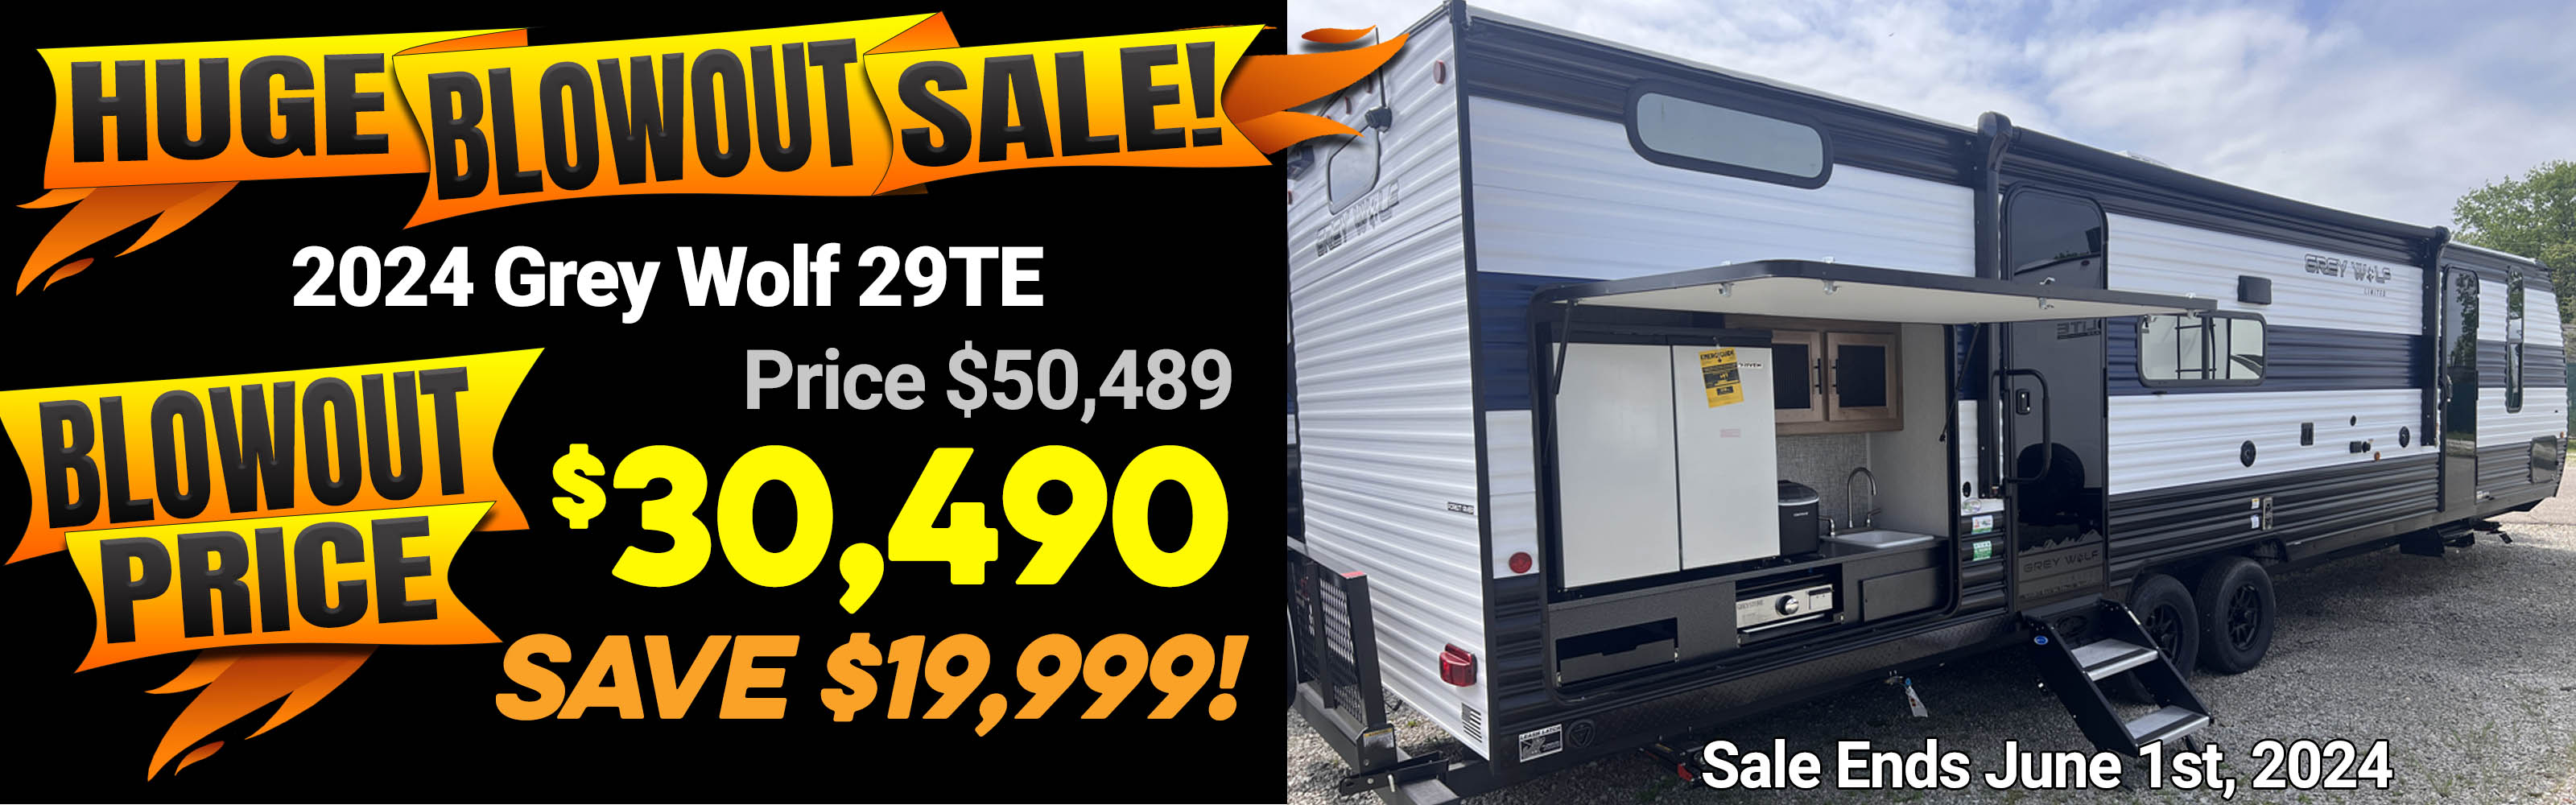 Grey Wolf 29TE Travel Trailer for sale